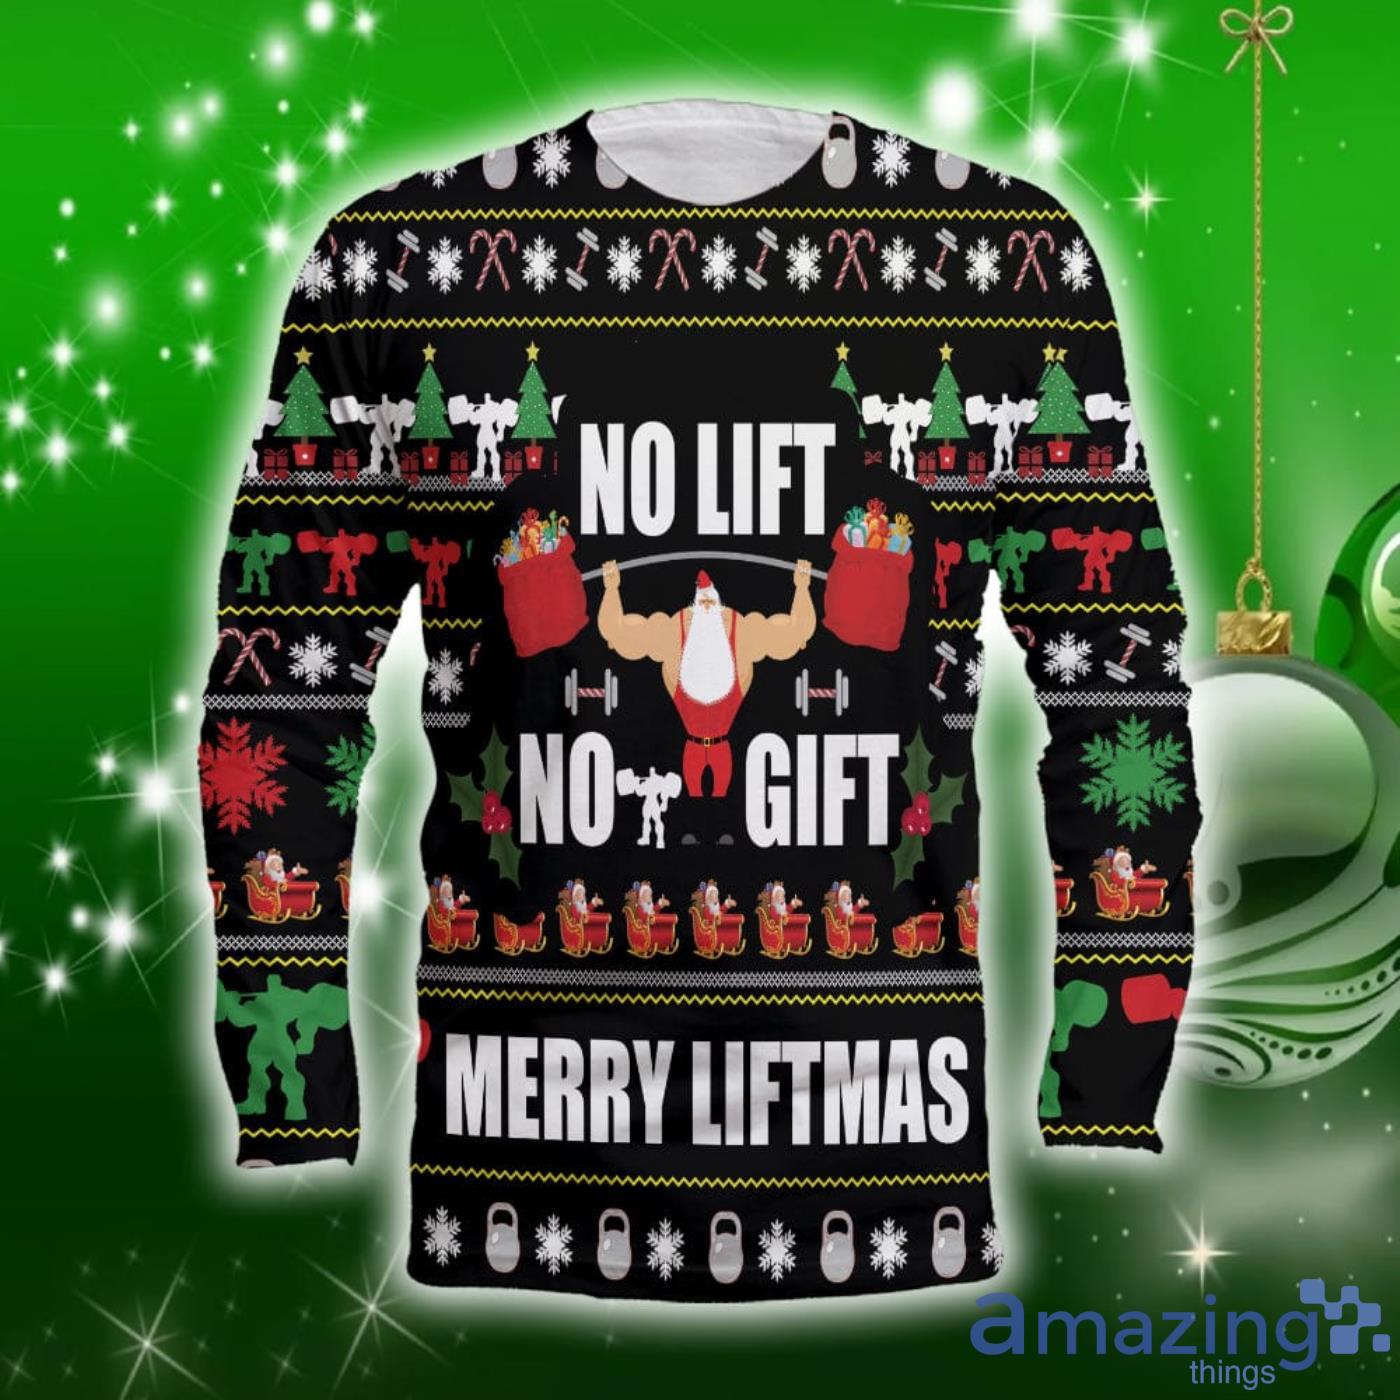 https://image.whatamazingthings.com/2022/09/no-lift-no-gift-weightlifting-christmas-pattern-all-over-print-3d-sweater-hoodie-2.jpg